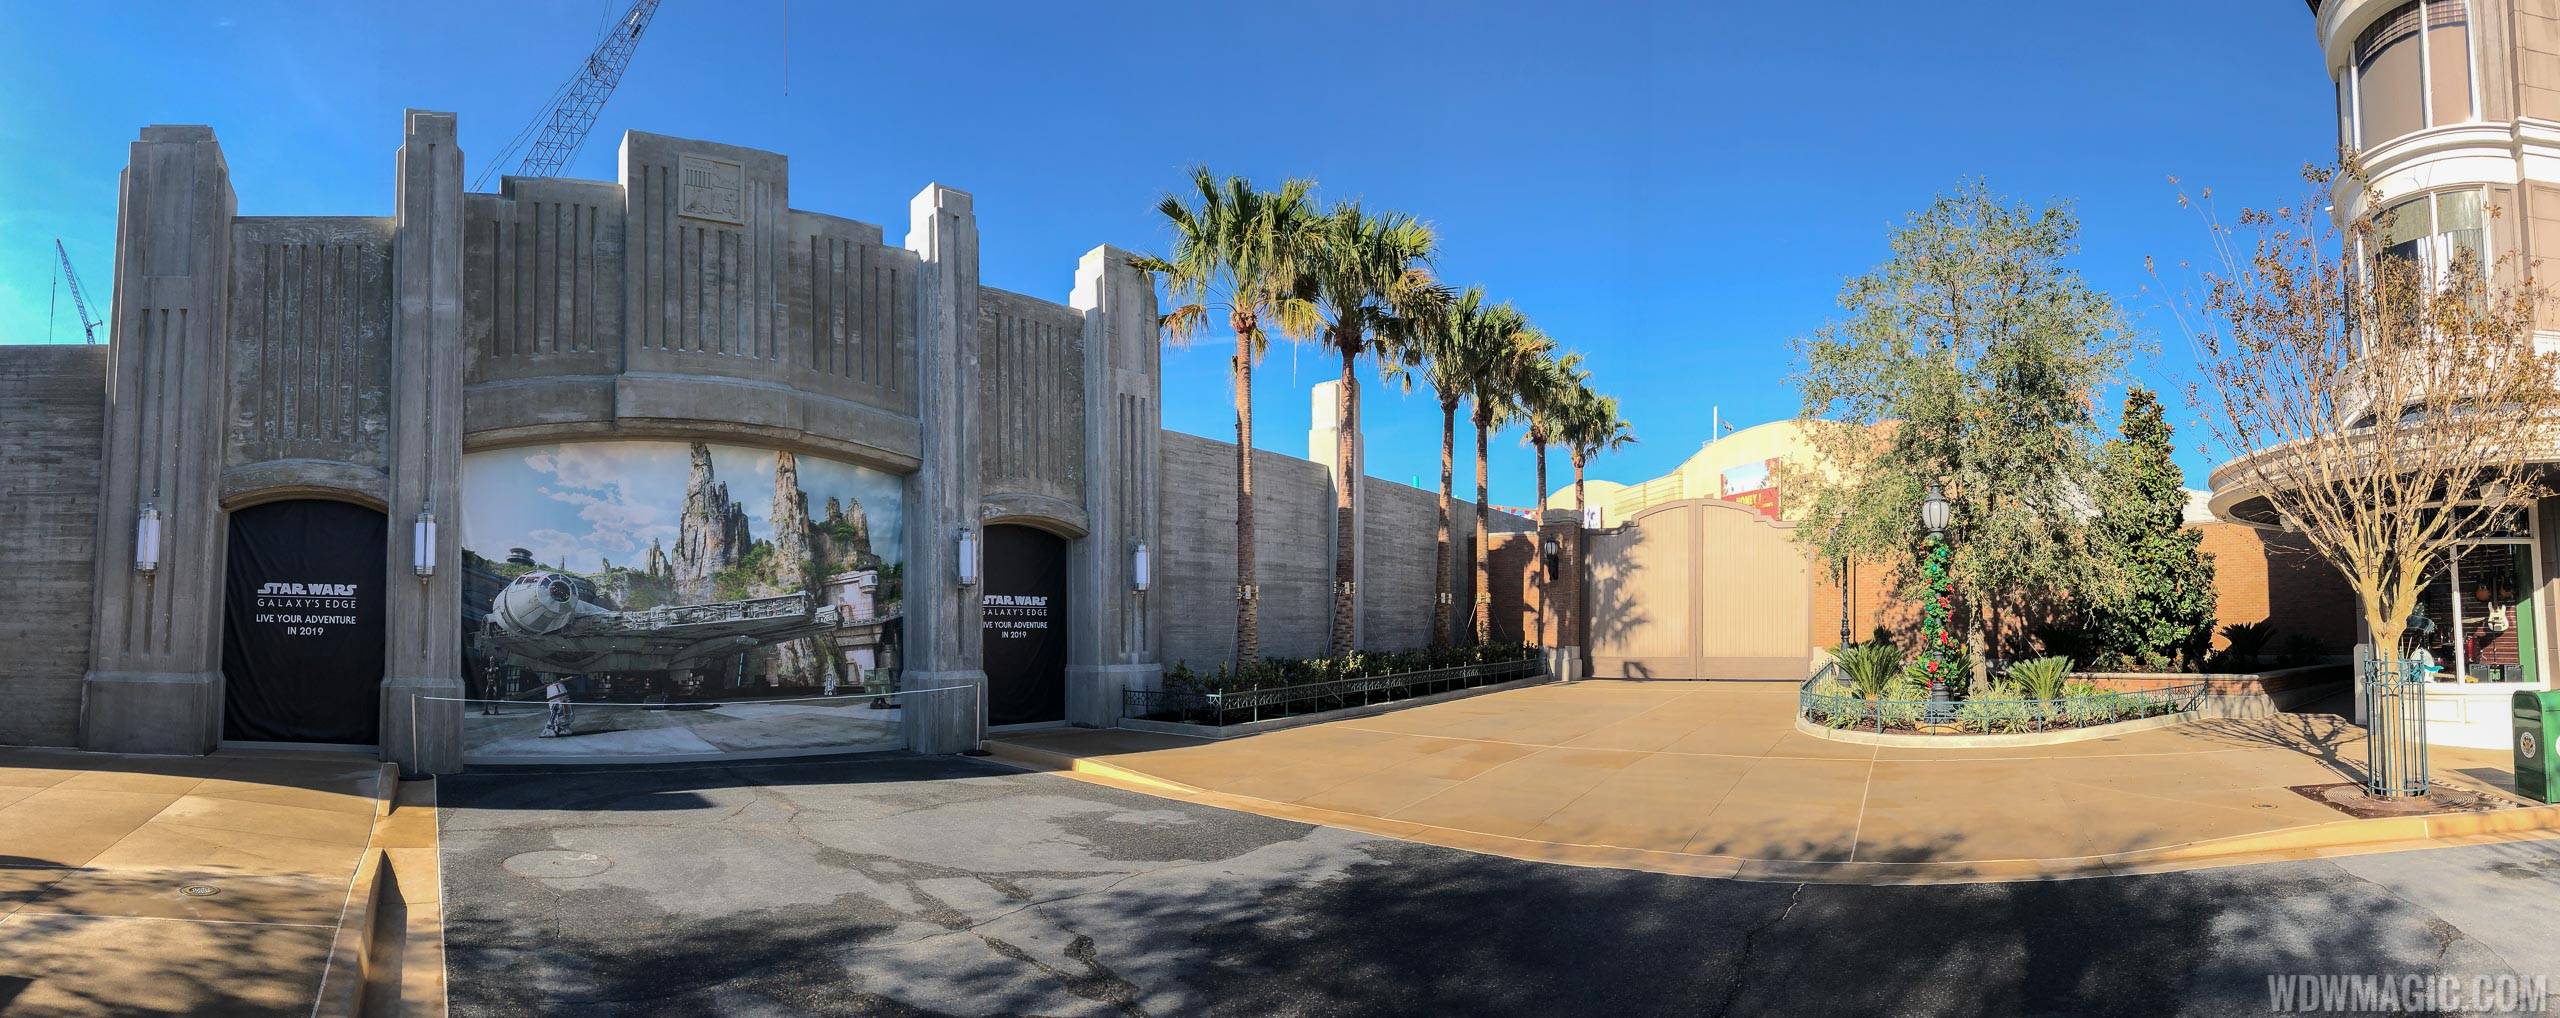 PHOTOS - All walls down at Grand Avenue reveal the entrances to Star Wars Galaxy's Edge